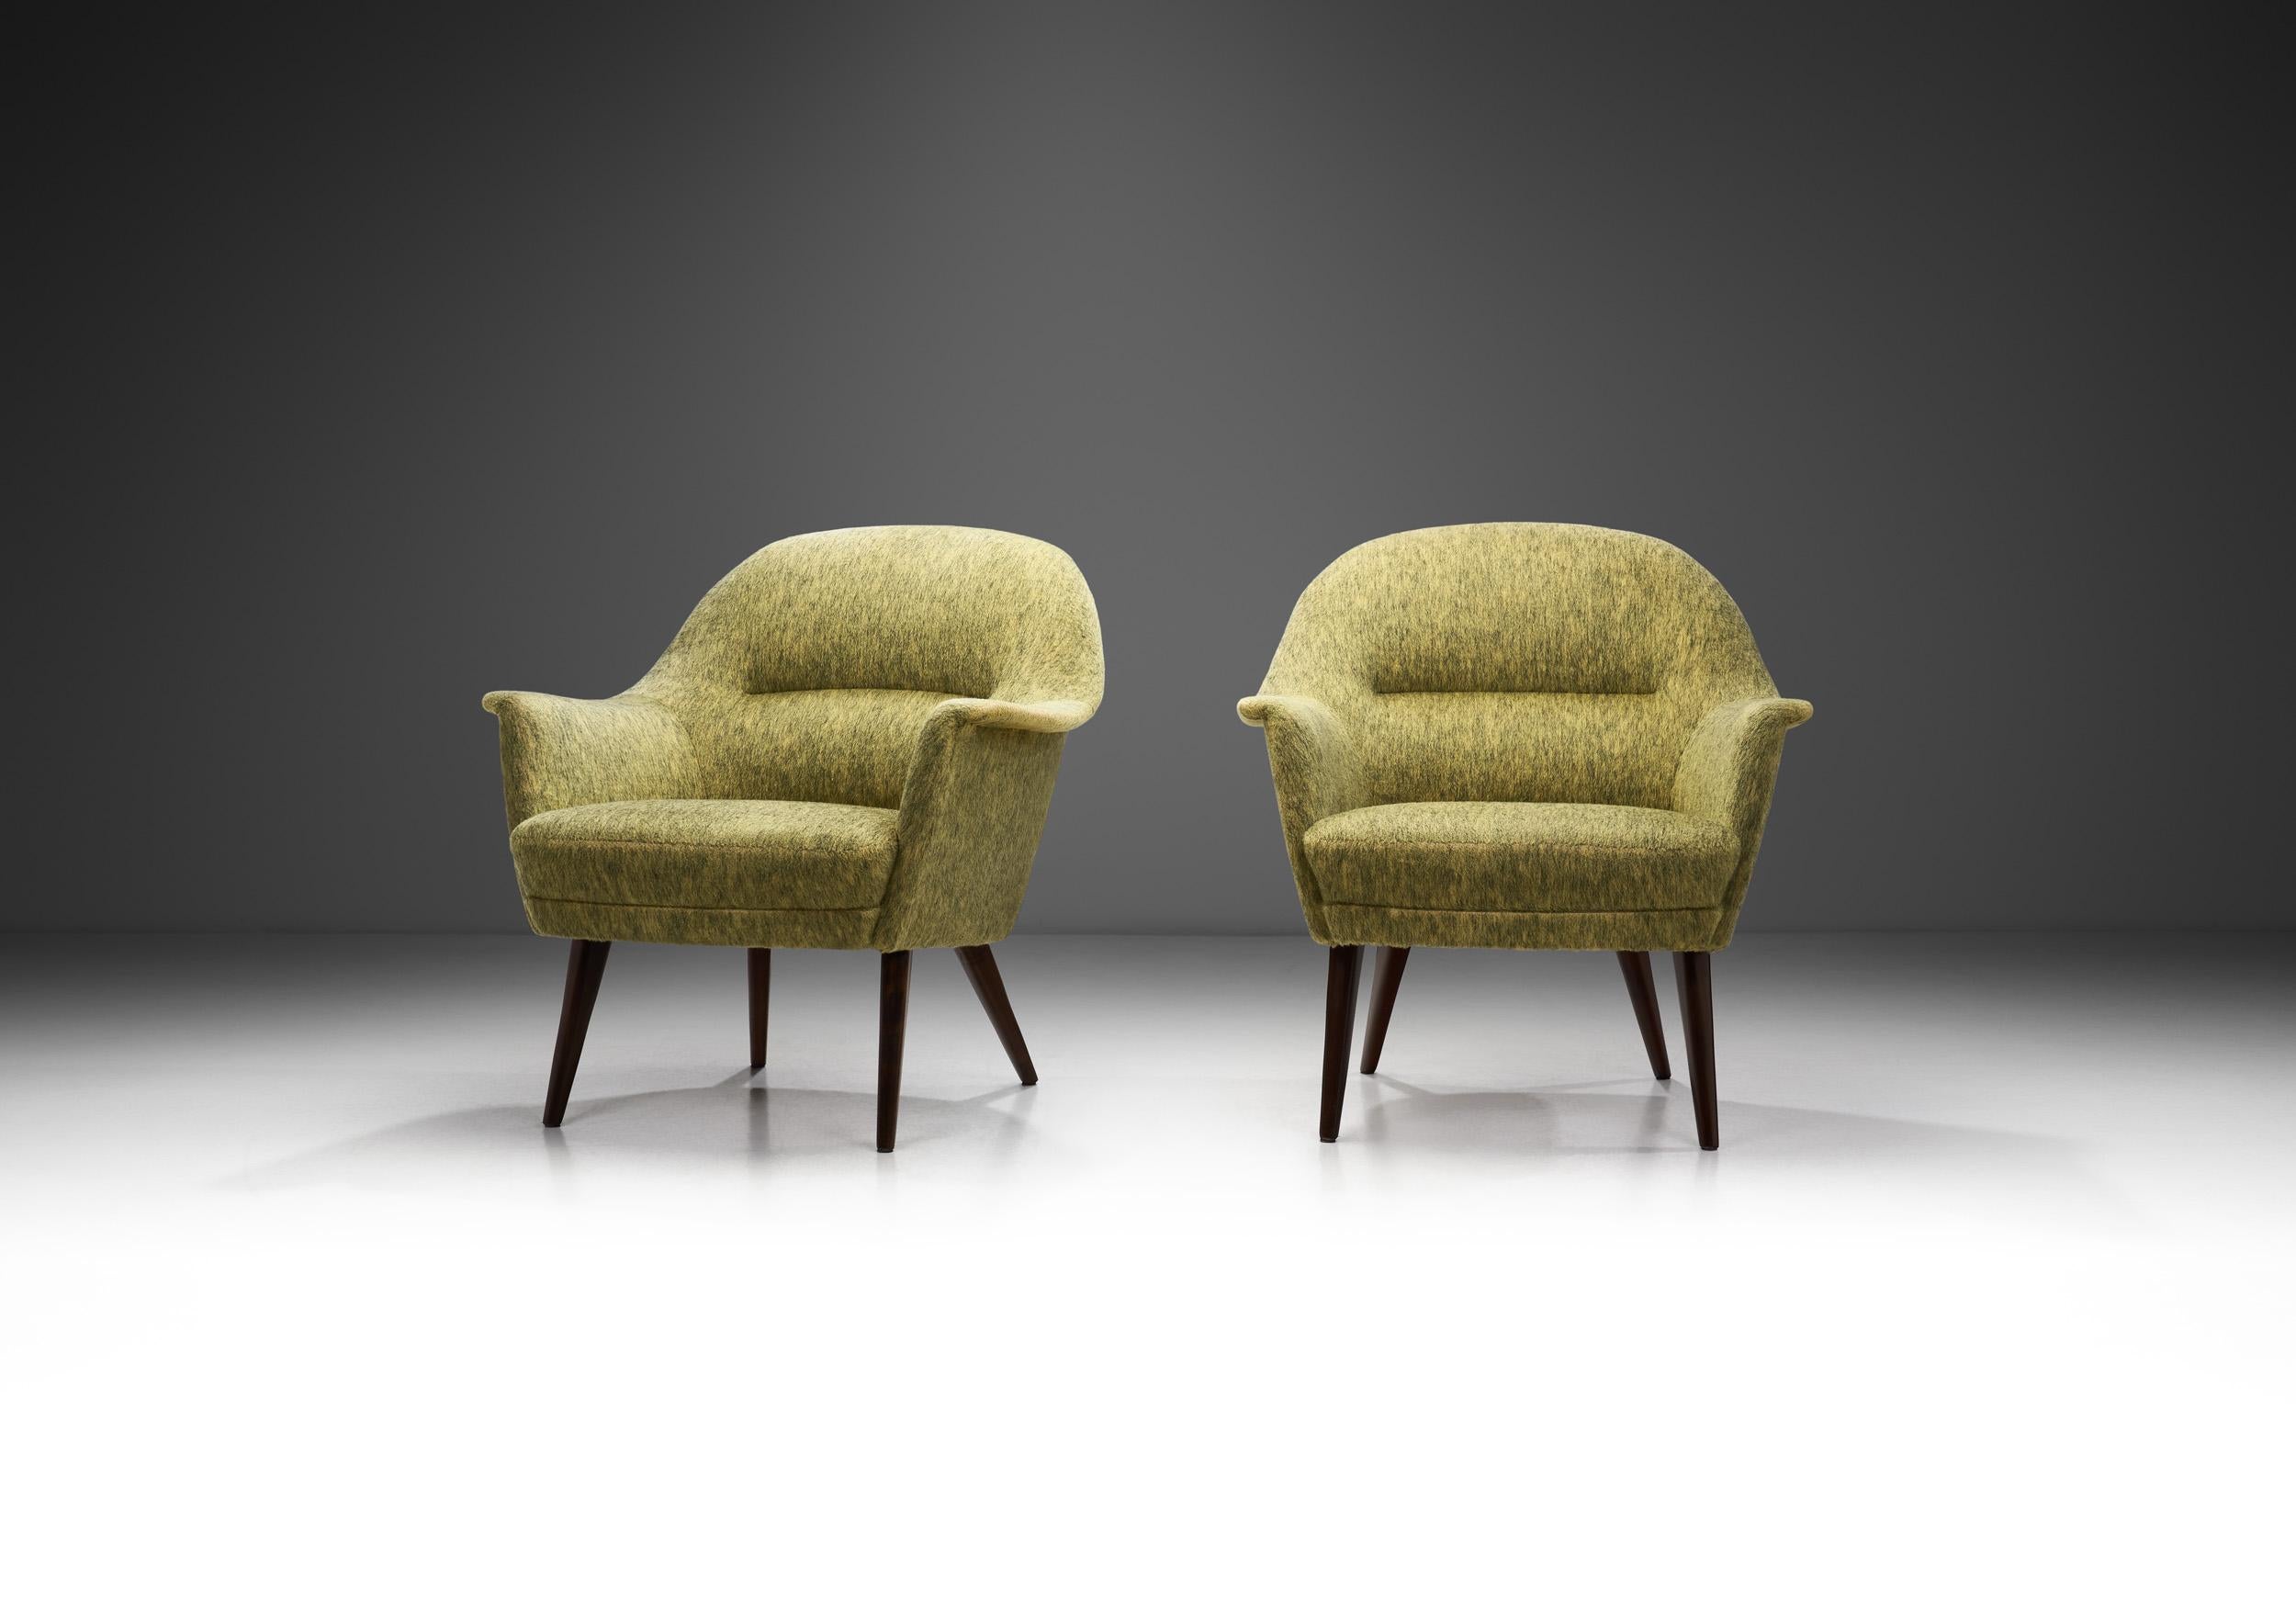 The so-called “cocktail chair” is a smaller type of upholstered chair with an elegant shape, that looks especially stylish as a feature chair in any room, or next to a mid-century sofa or drinks trolley. It made its first appearance in the 1950s and